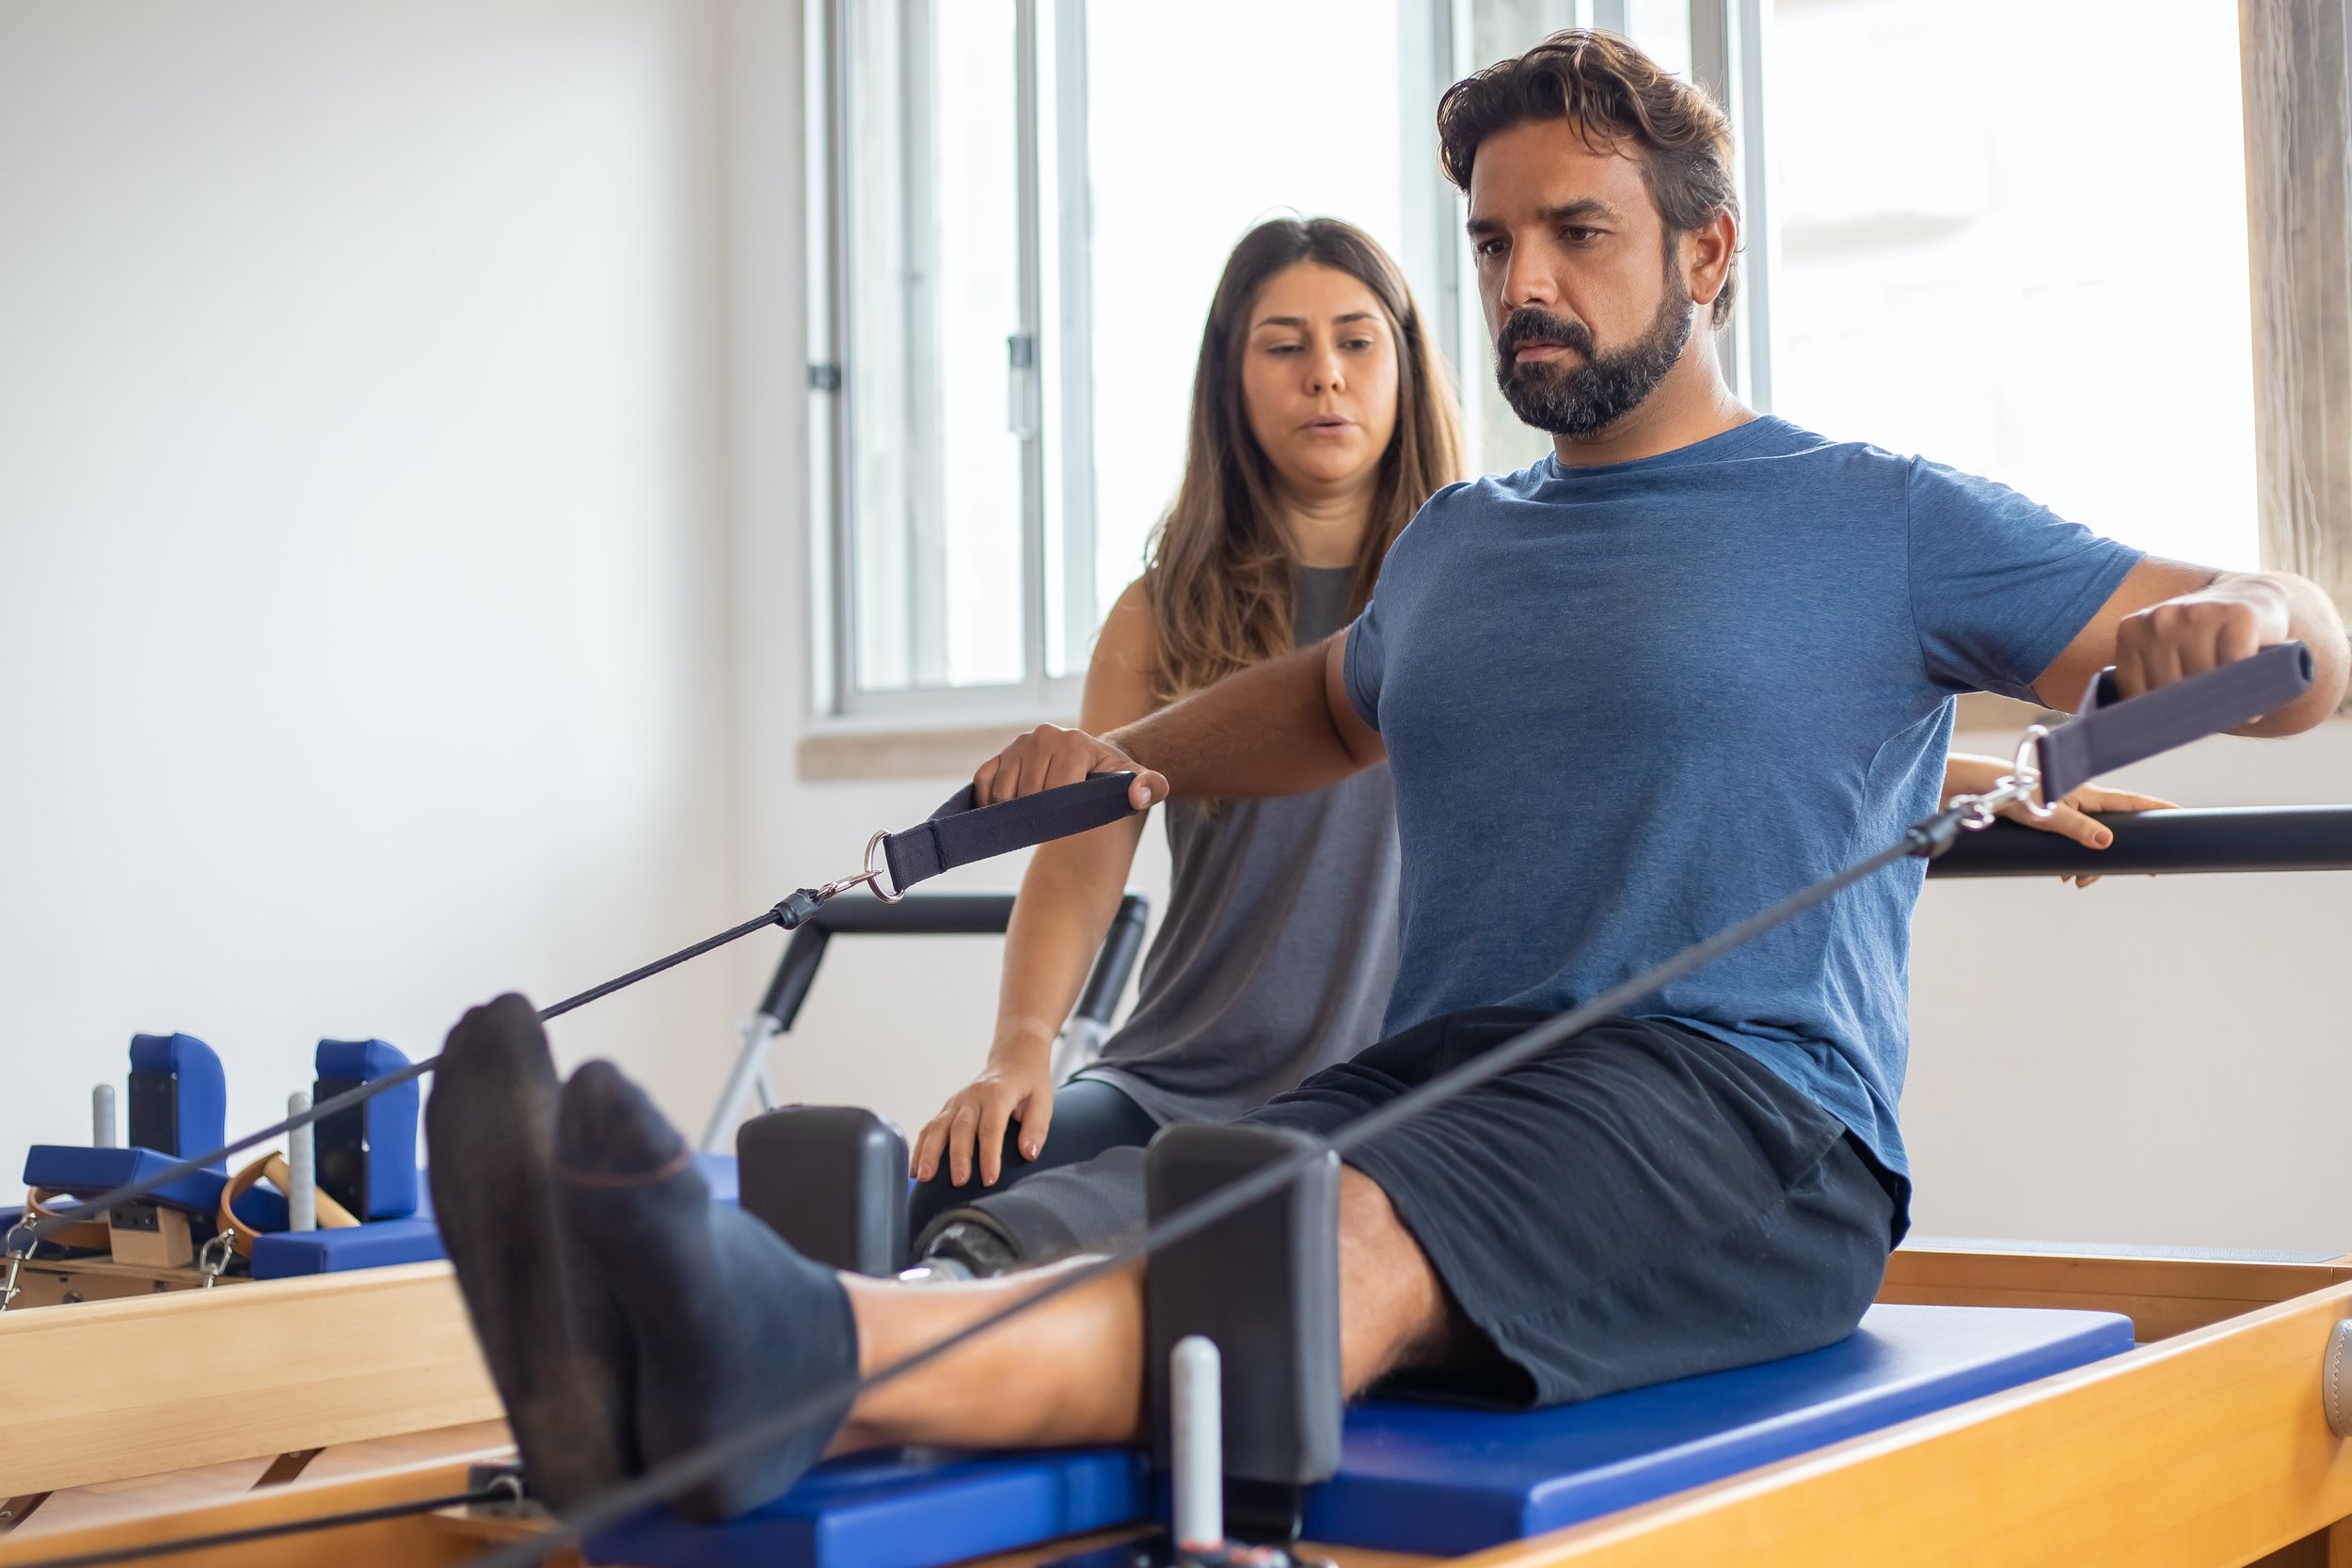 Lose Weight, Get Fit and Recover From Injury With Reformer Pilates